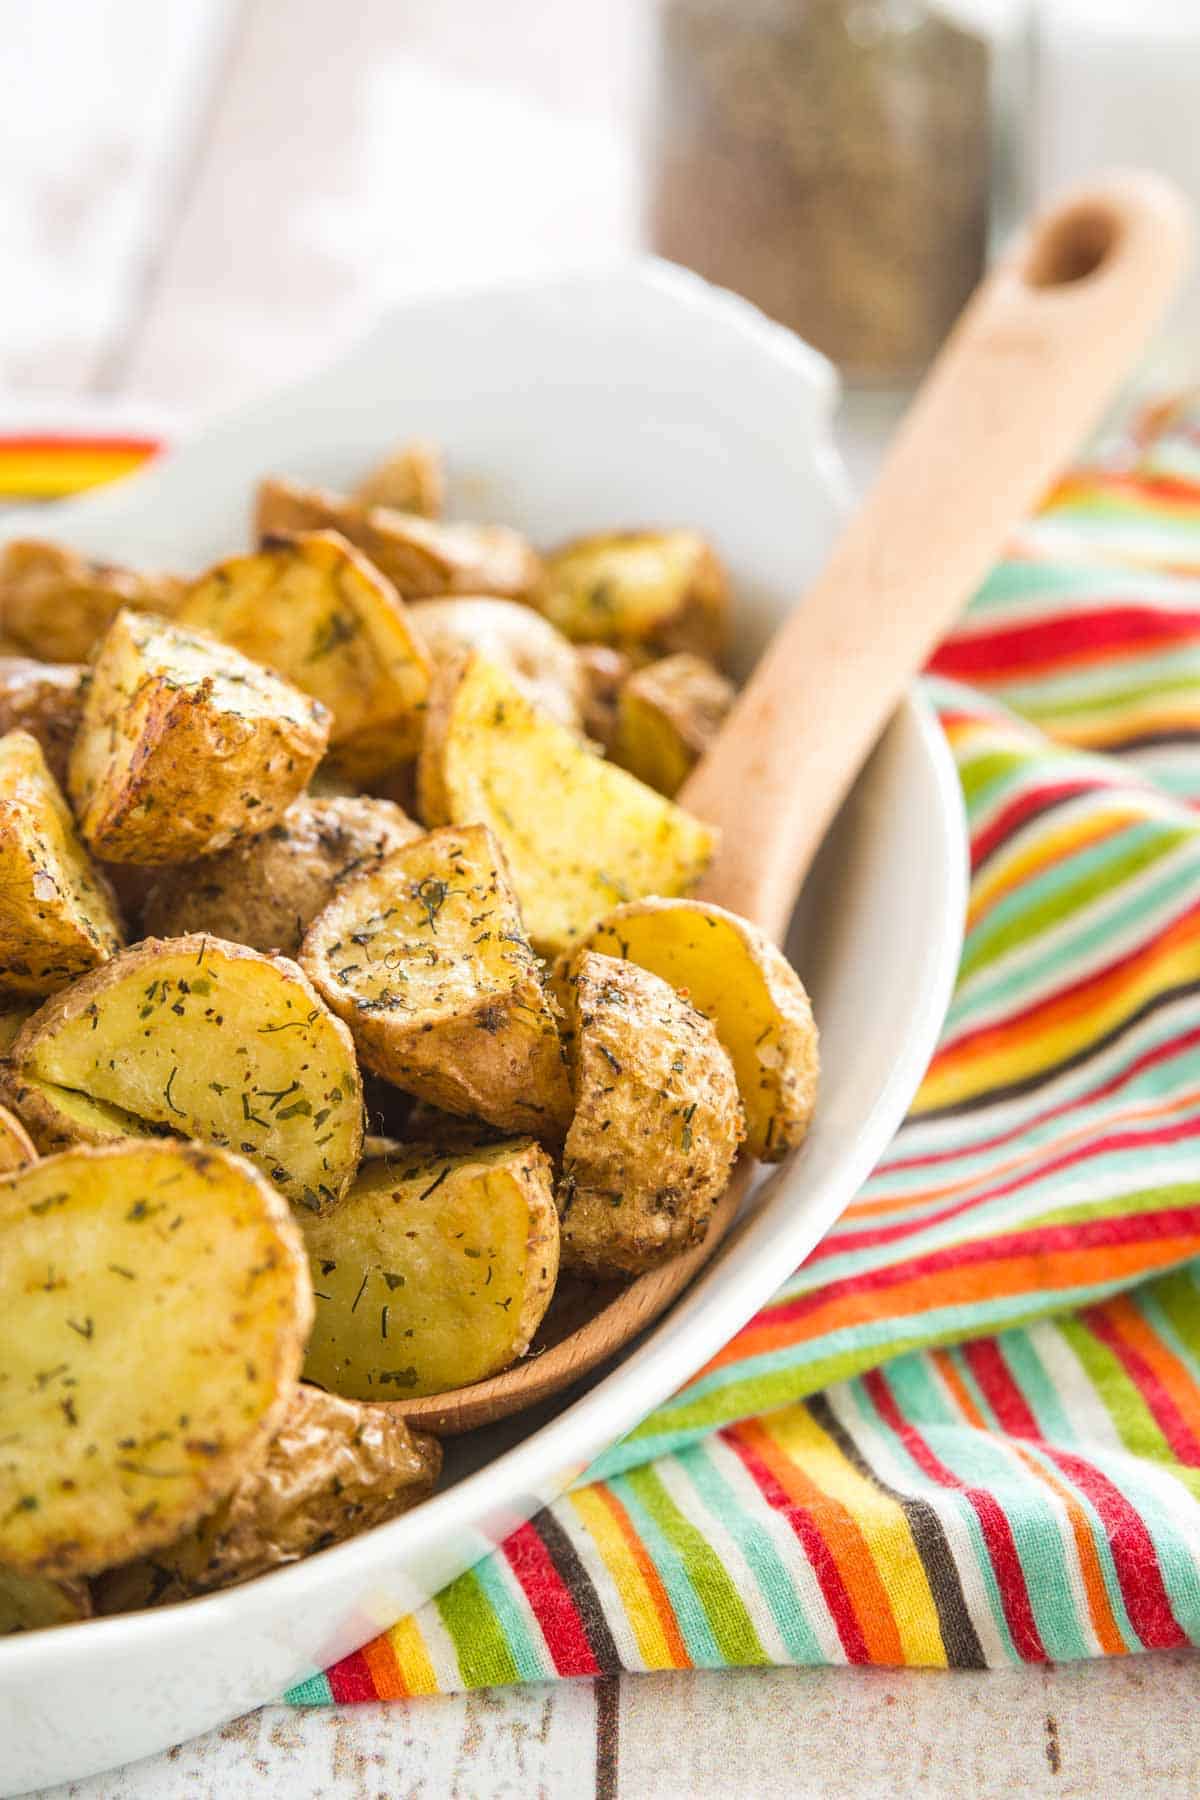 A dish filled with crispy air fryer ranch potatoes, with a spoon for serving.